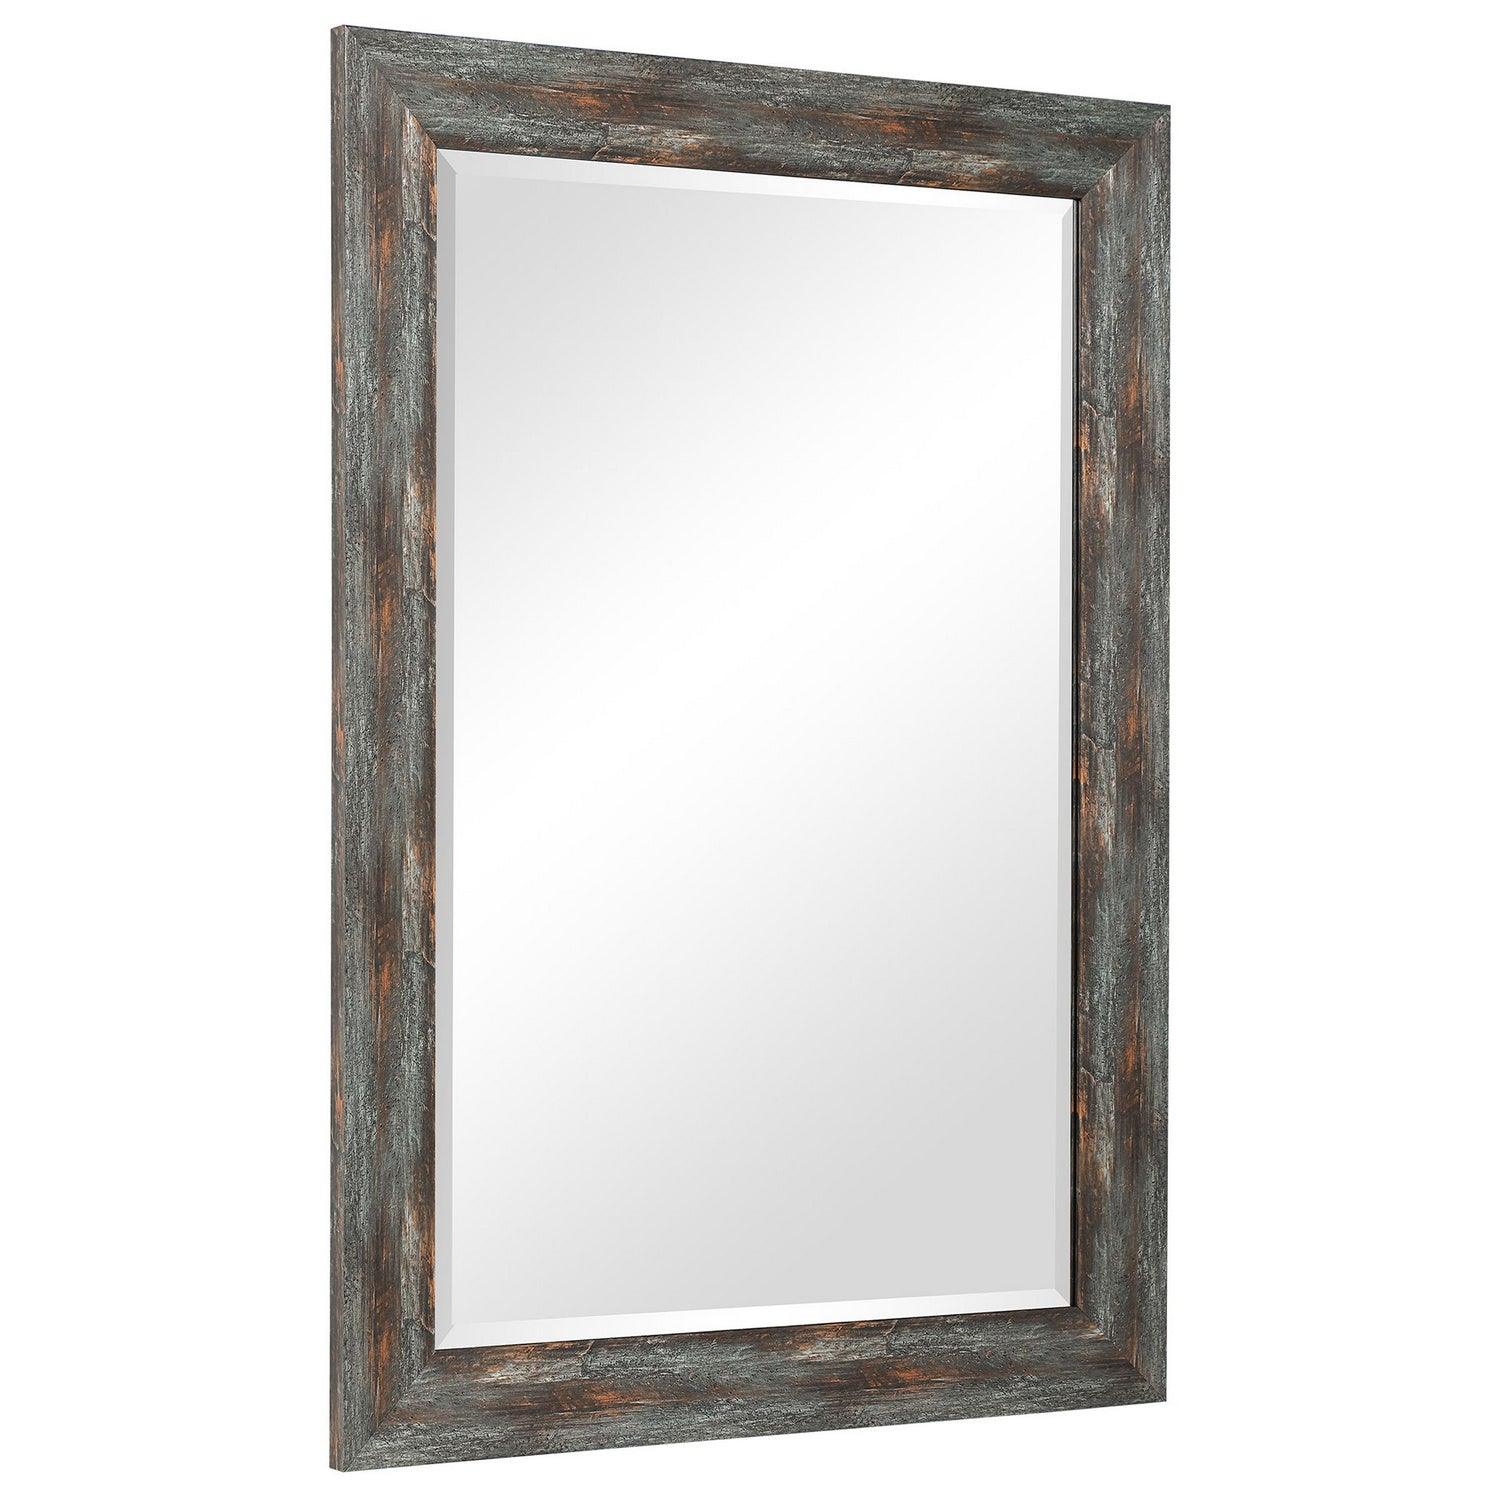 The Uttermost - Owenby Mirror - 09724 | Montreal Lighting & Hardware